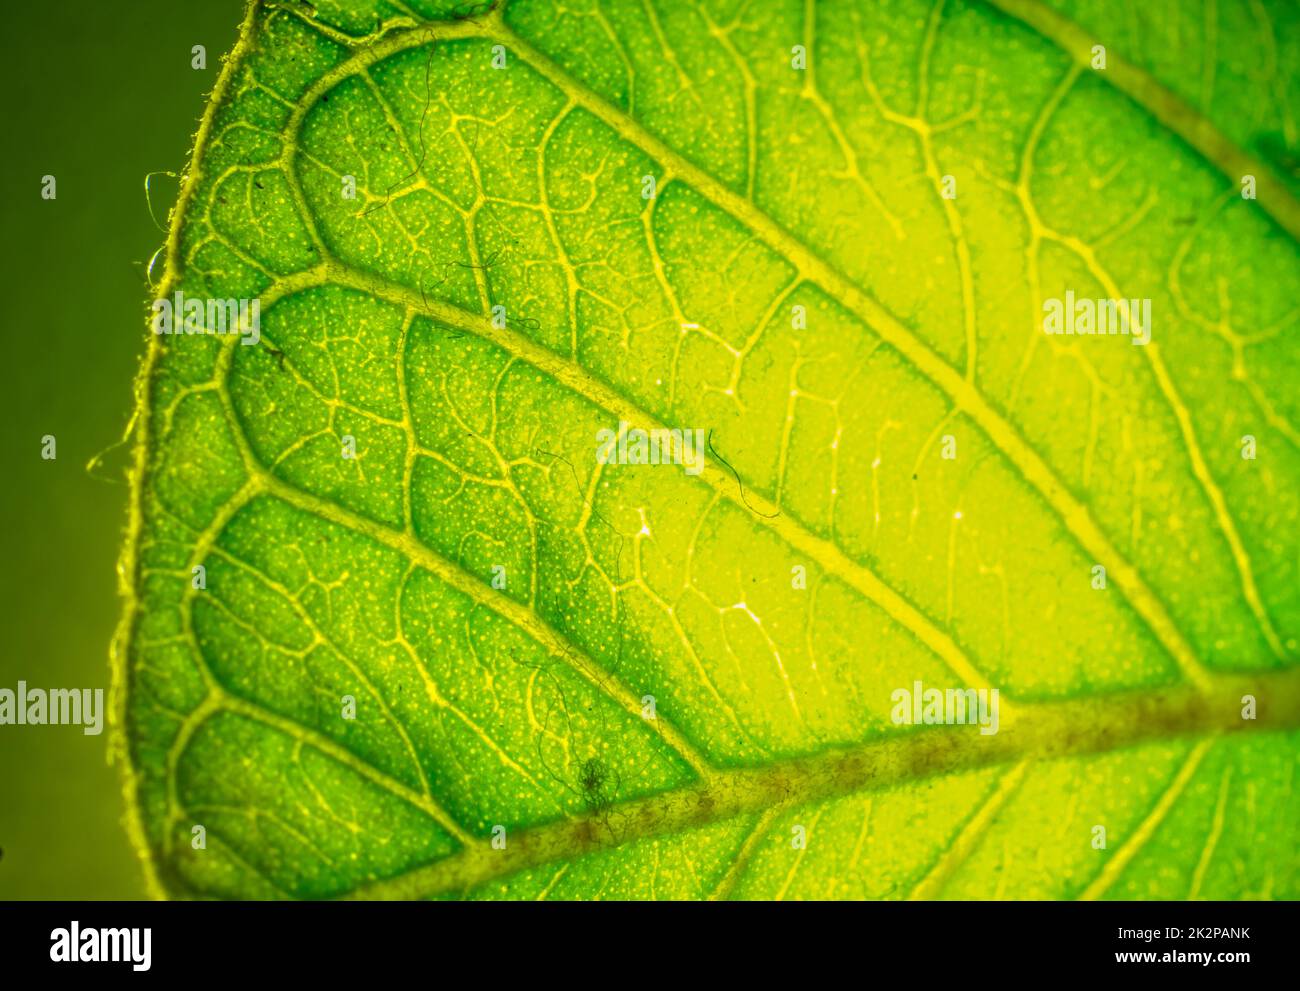 guava leaf surface texture from macro photography, plant closeup view. Stock Photo